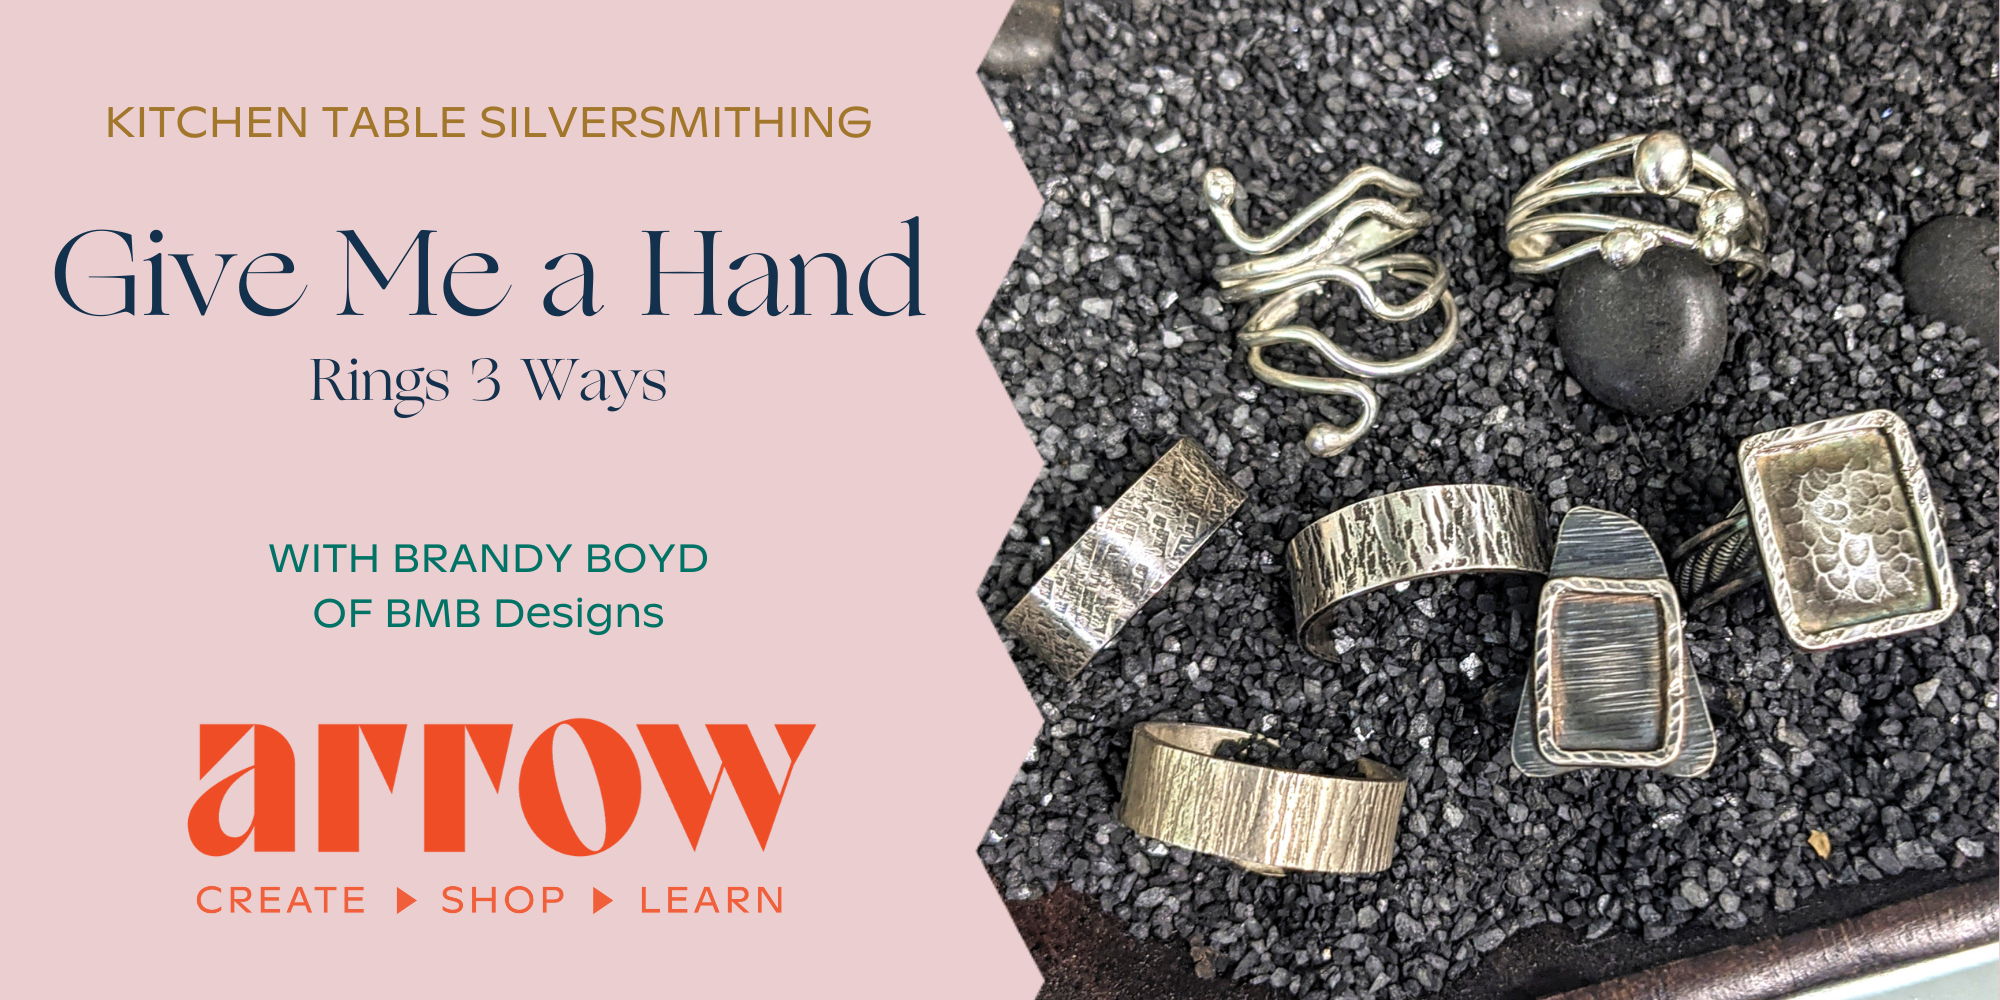 Kitchen Table Silversmithing: Rings 3 Ways with BMB Designs promotional image